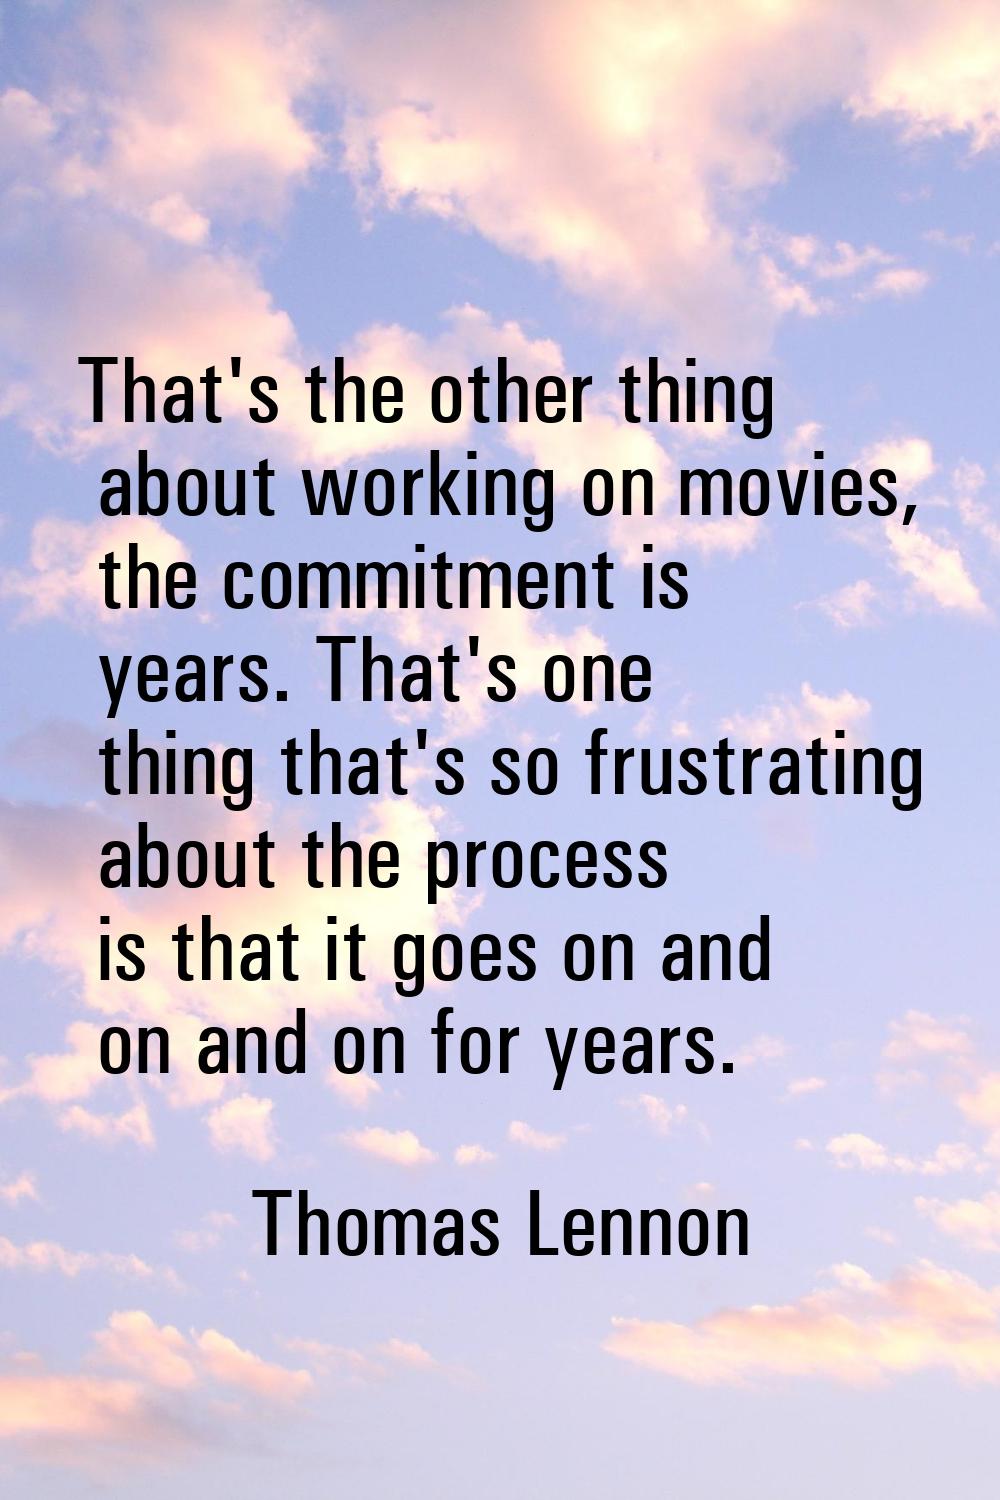 That's the other thing about working on movies, the commitment is years. That's one thing that's so